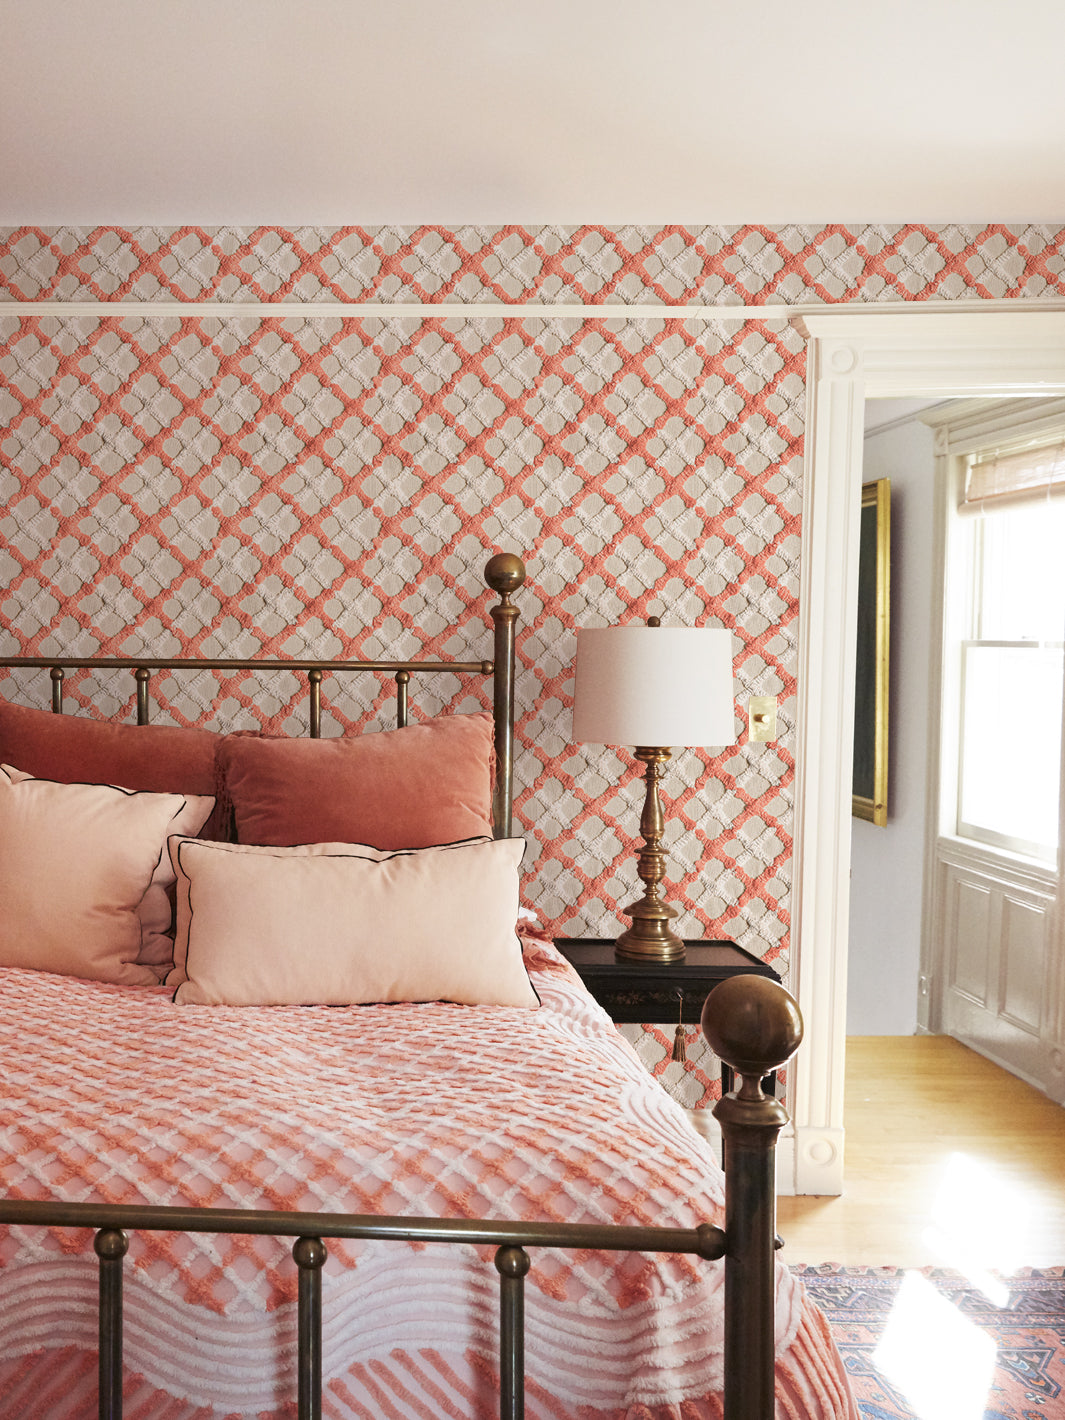 'Chenille Quilt' Wallpaper by Chris Benz - Salmon